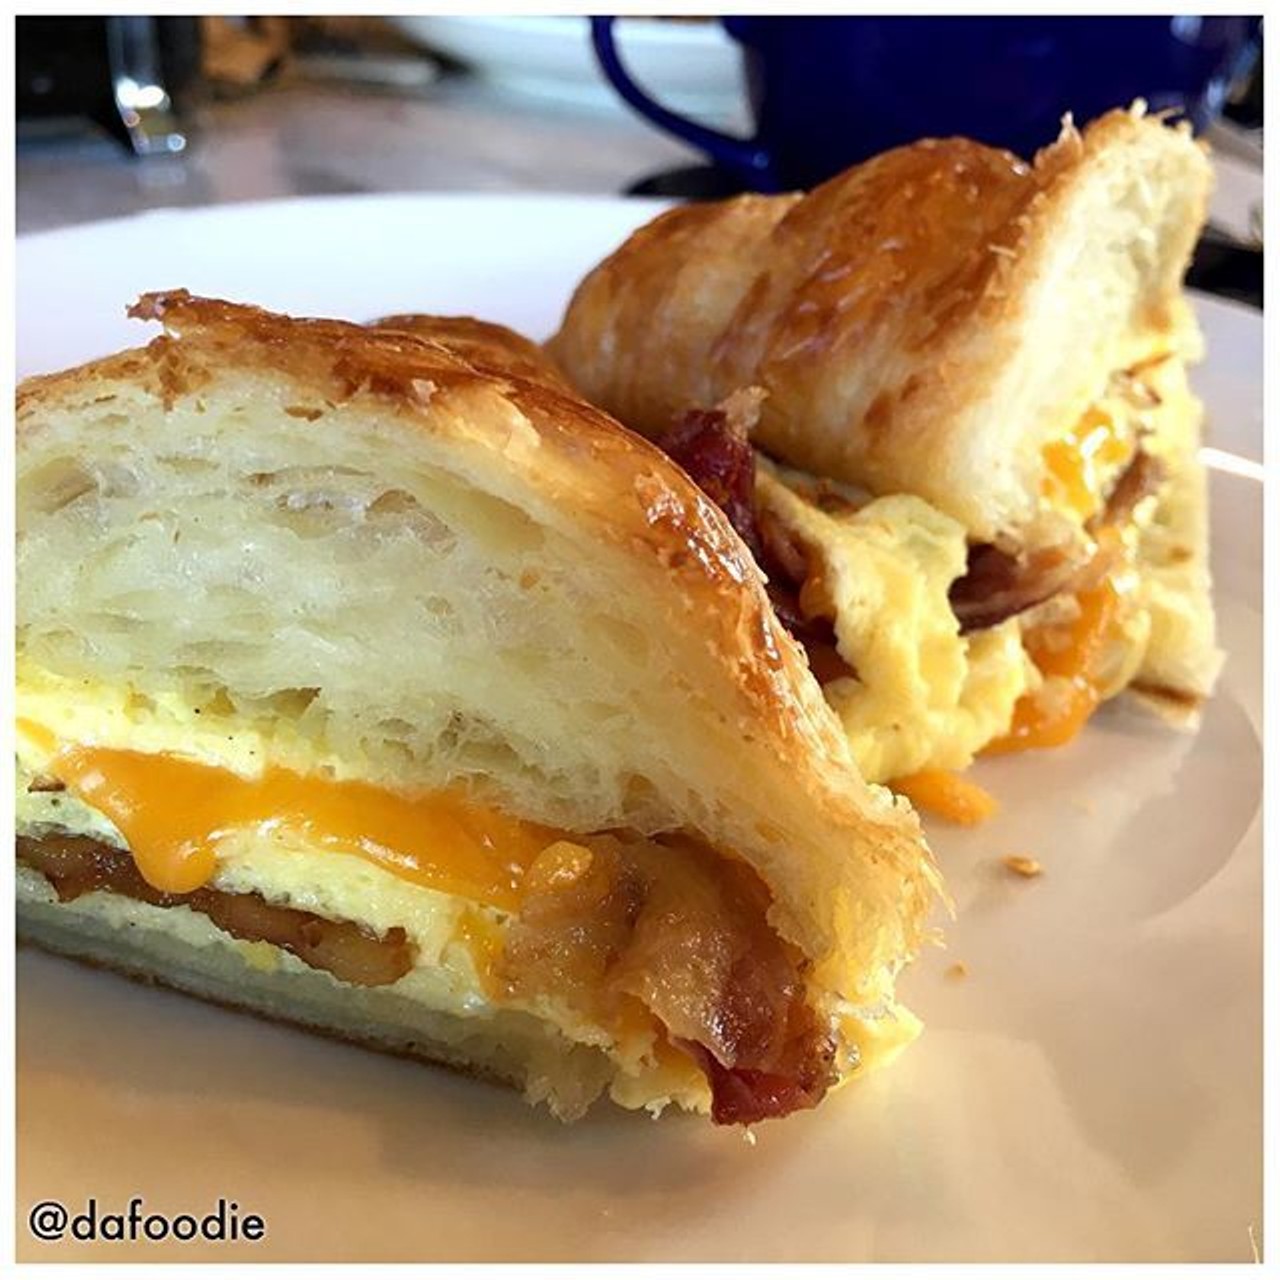 @dafoodie | Dafoodie helps any Orlandoan discover the yummiest local dishes.